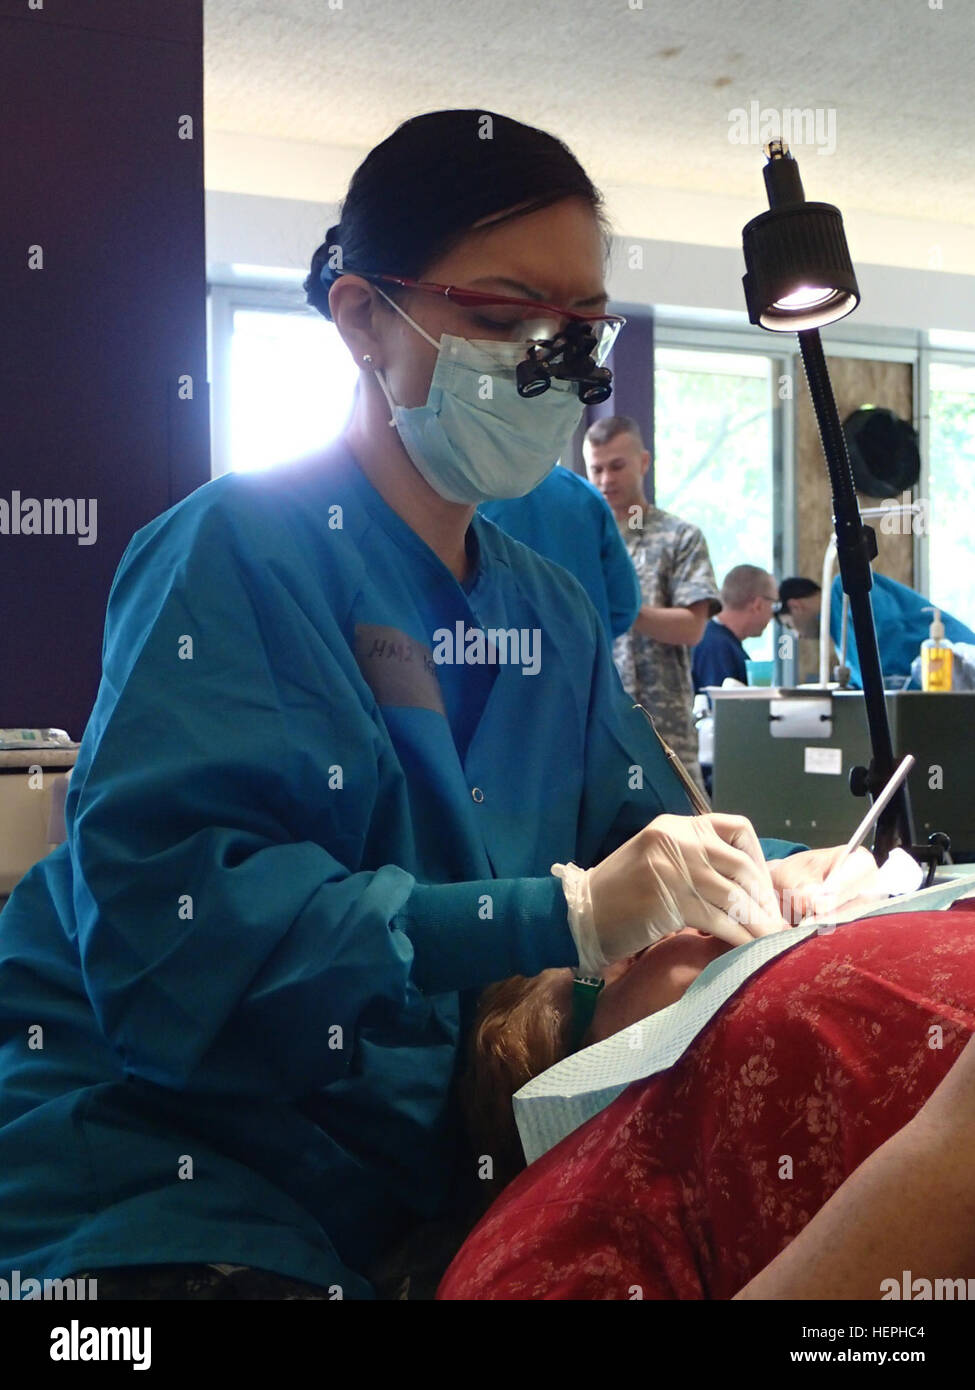 Petty Officer 2nd Class Cherry Ignacio, a dental tech from EMF Camp Pendleton provides dental care during Greater Chenango Cares. July 12, 2015. Greater Chenango Cares is one of the Innovative Readiness Training missions which provides real-world training in a joint civil-military environment while delivering world class medical care to the people of Chenango County, N.Y., from July 13-23. (U.S. Army photo by Sgt. Jennifer Shick/released) Service members provide dental care for patients during IRT mission at Norwich, NY 150713-A-SC854-187 Stock Photo